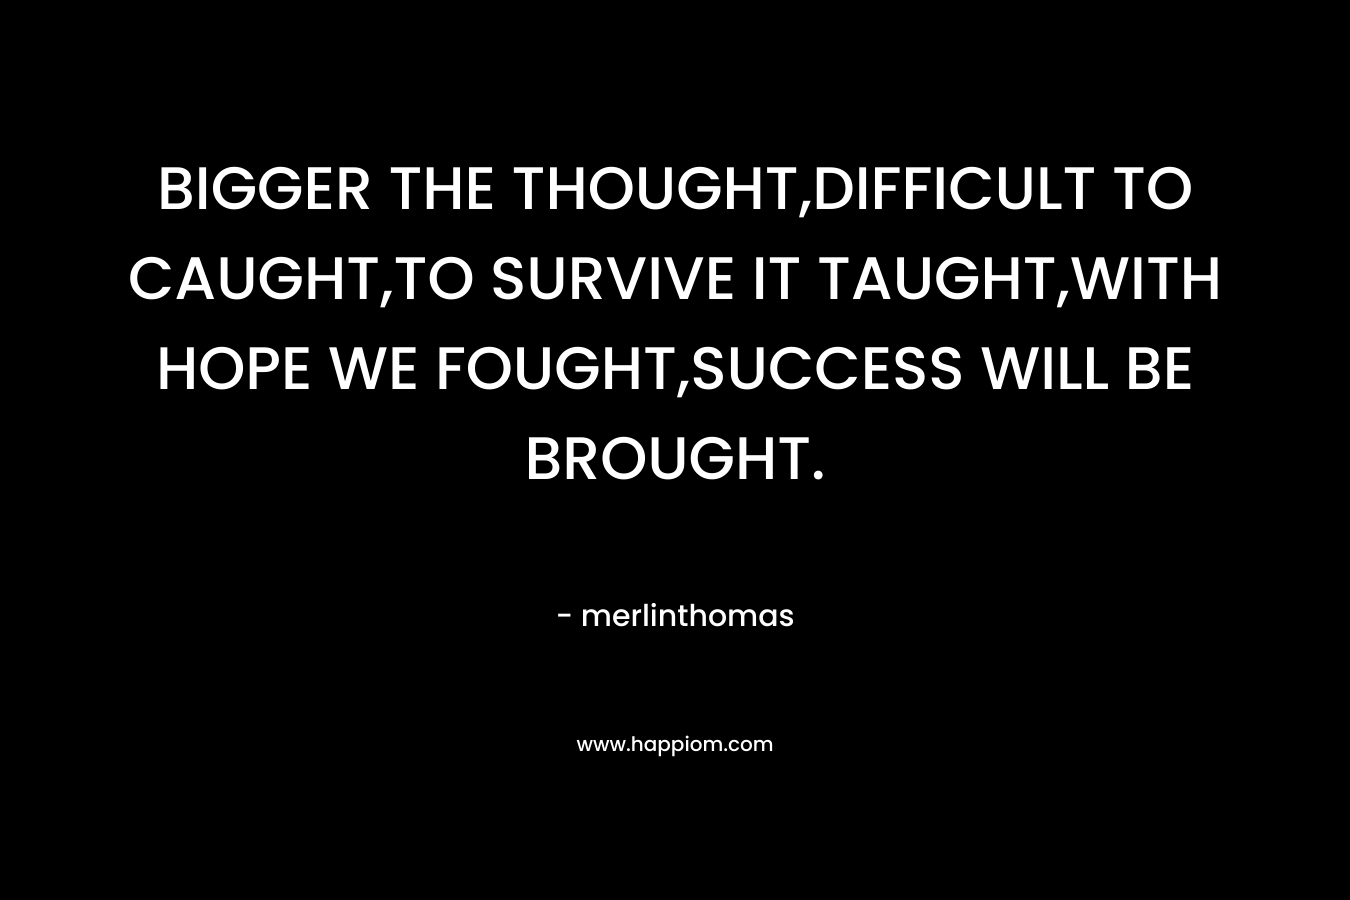 BIGGER THE THOUGHT,DIFFICULT TO CAUGHT,TO SURVIVE IT TAUGHT,WITH HOPE WE FOUGHT,SUCCESS WILL BE BROUGHT. – merlinthomas